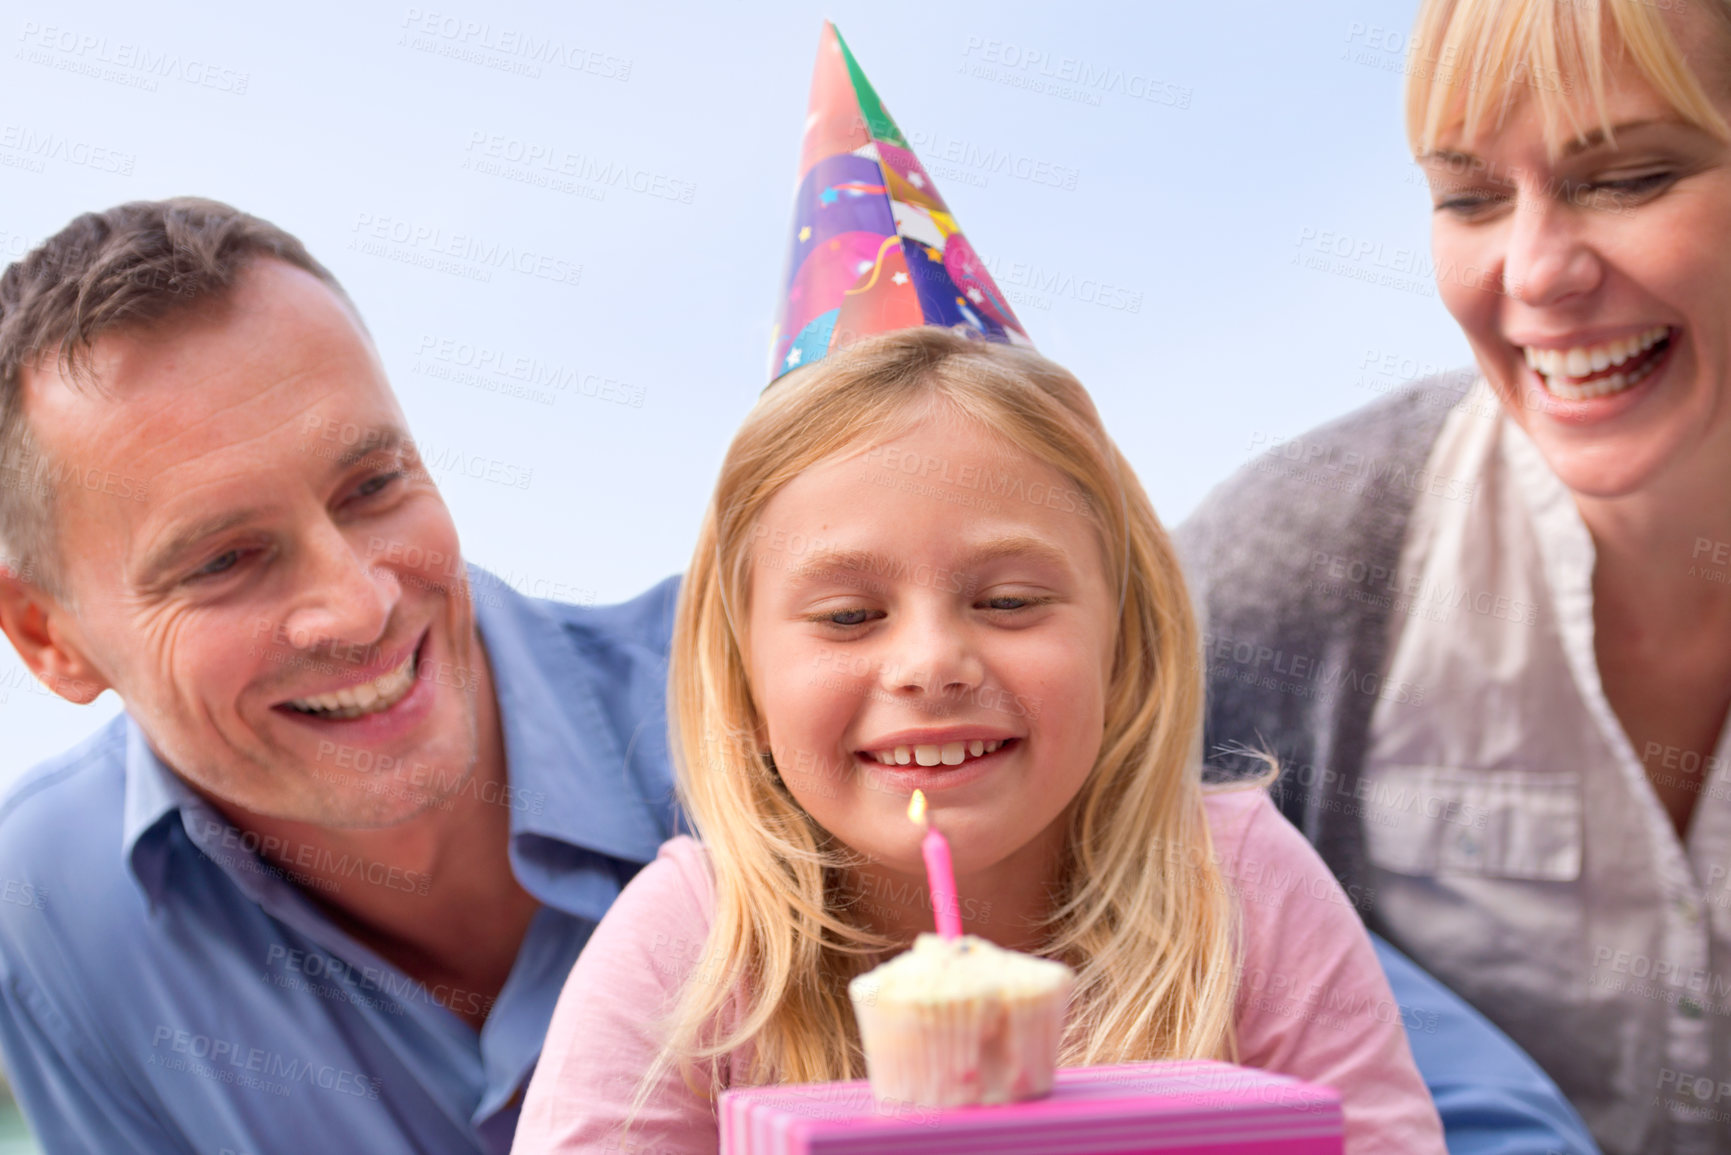 Buy stock photo A cropped shot of a happy little girl and her parents celebrating her birthday